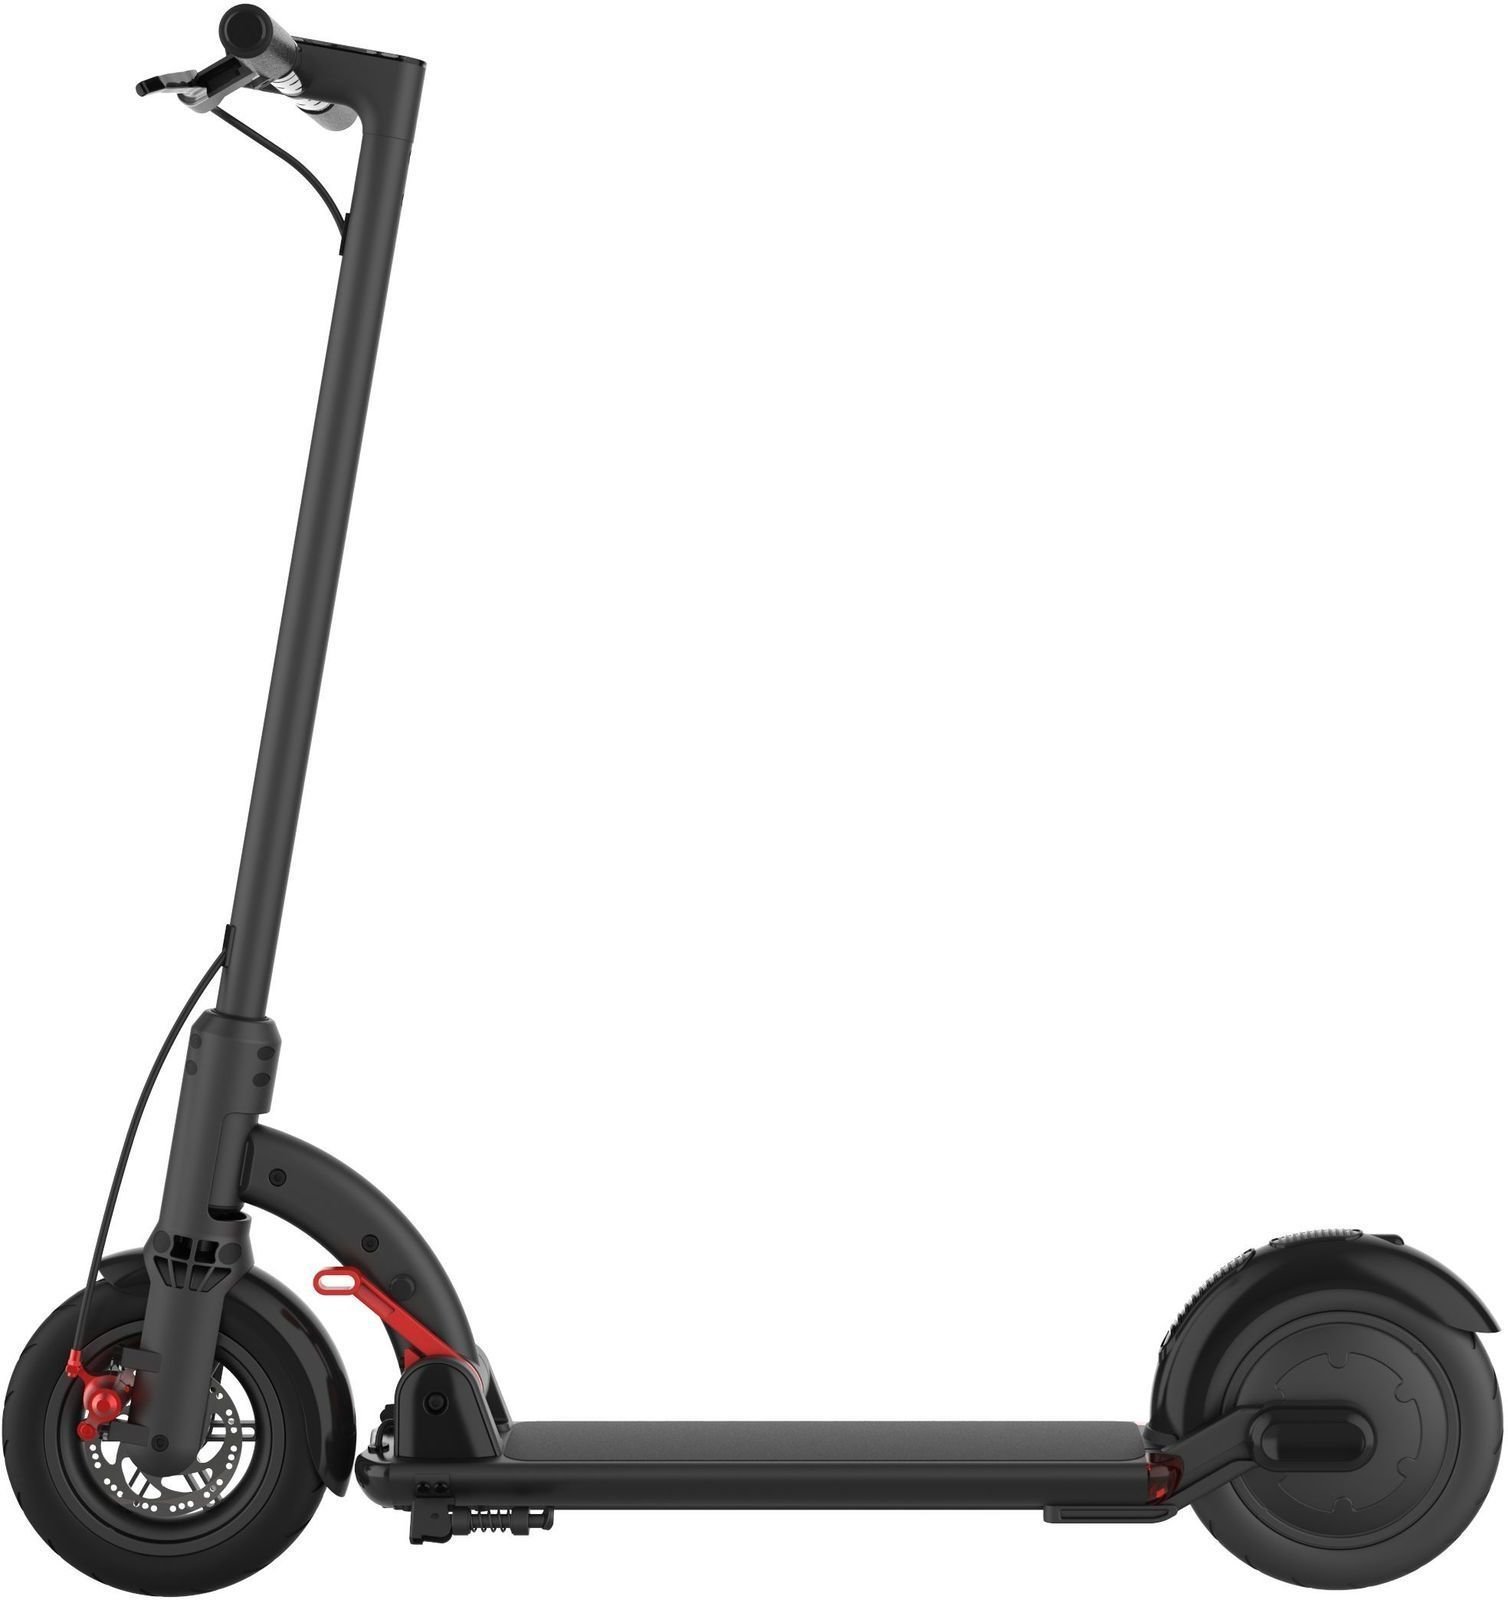 Scuter electric Smarthlon N4 Electric Scooter 8.5'' Black